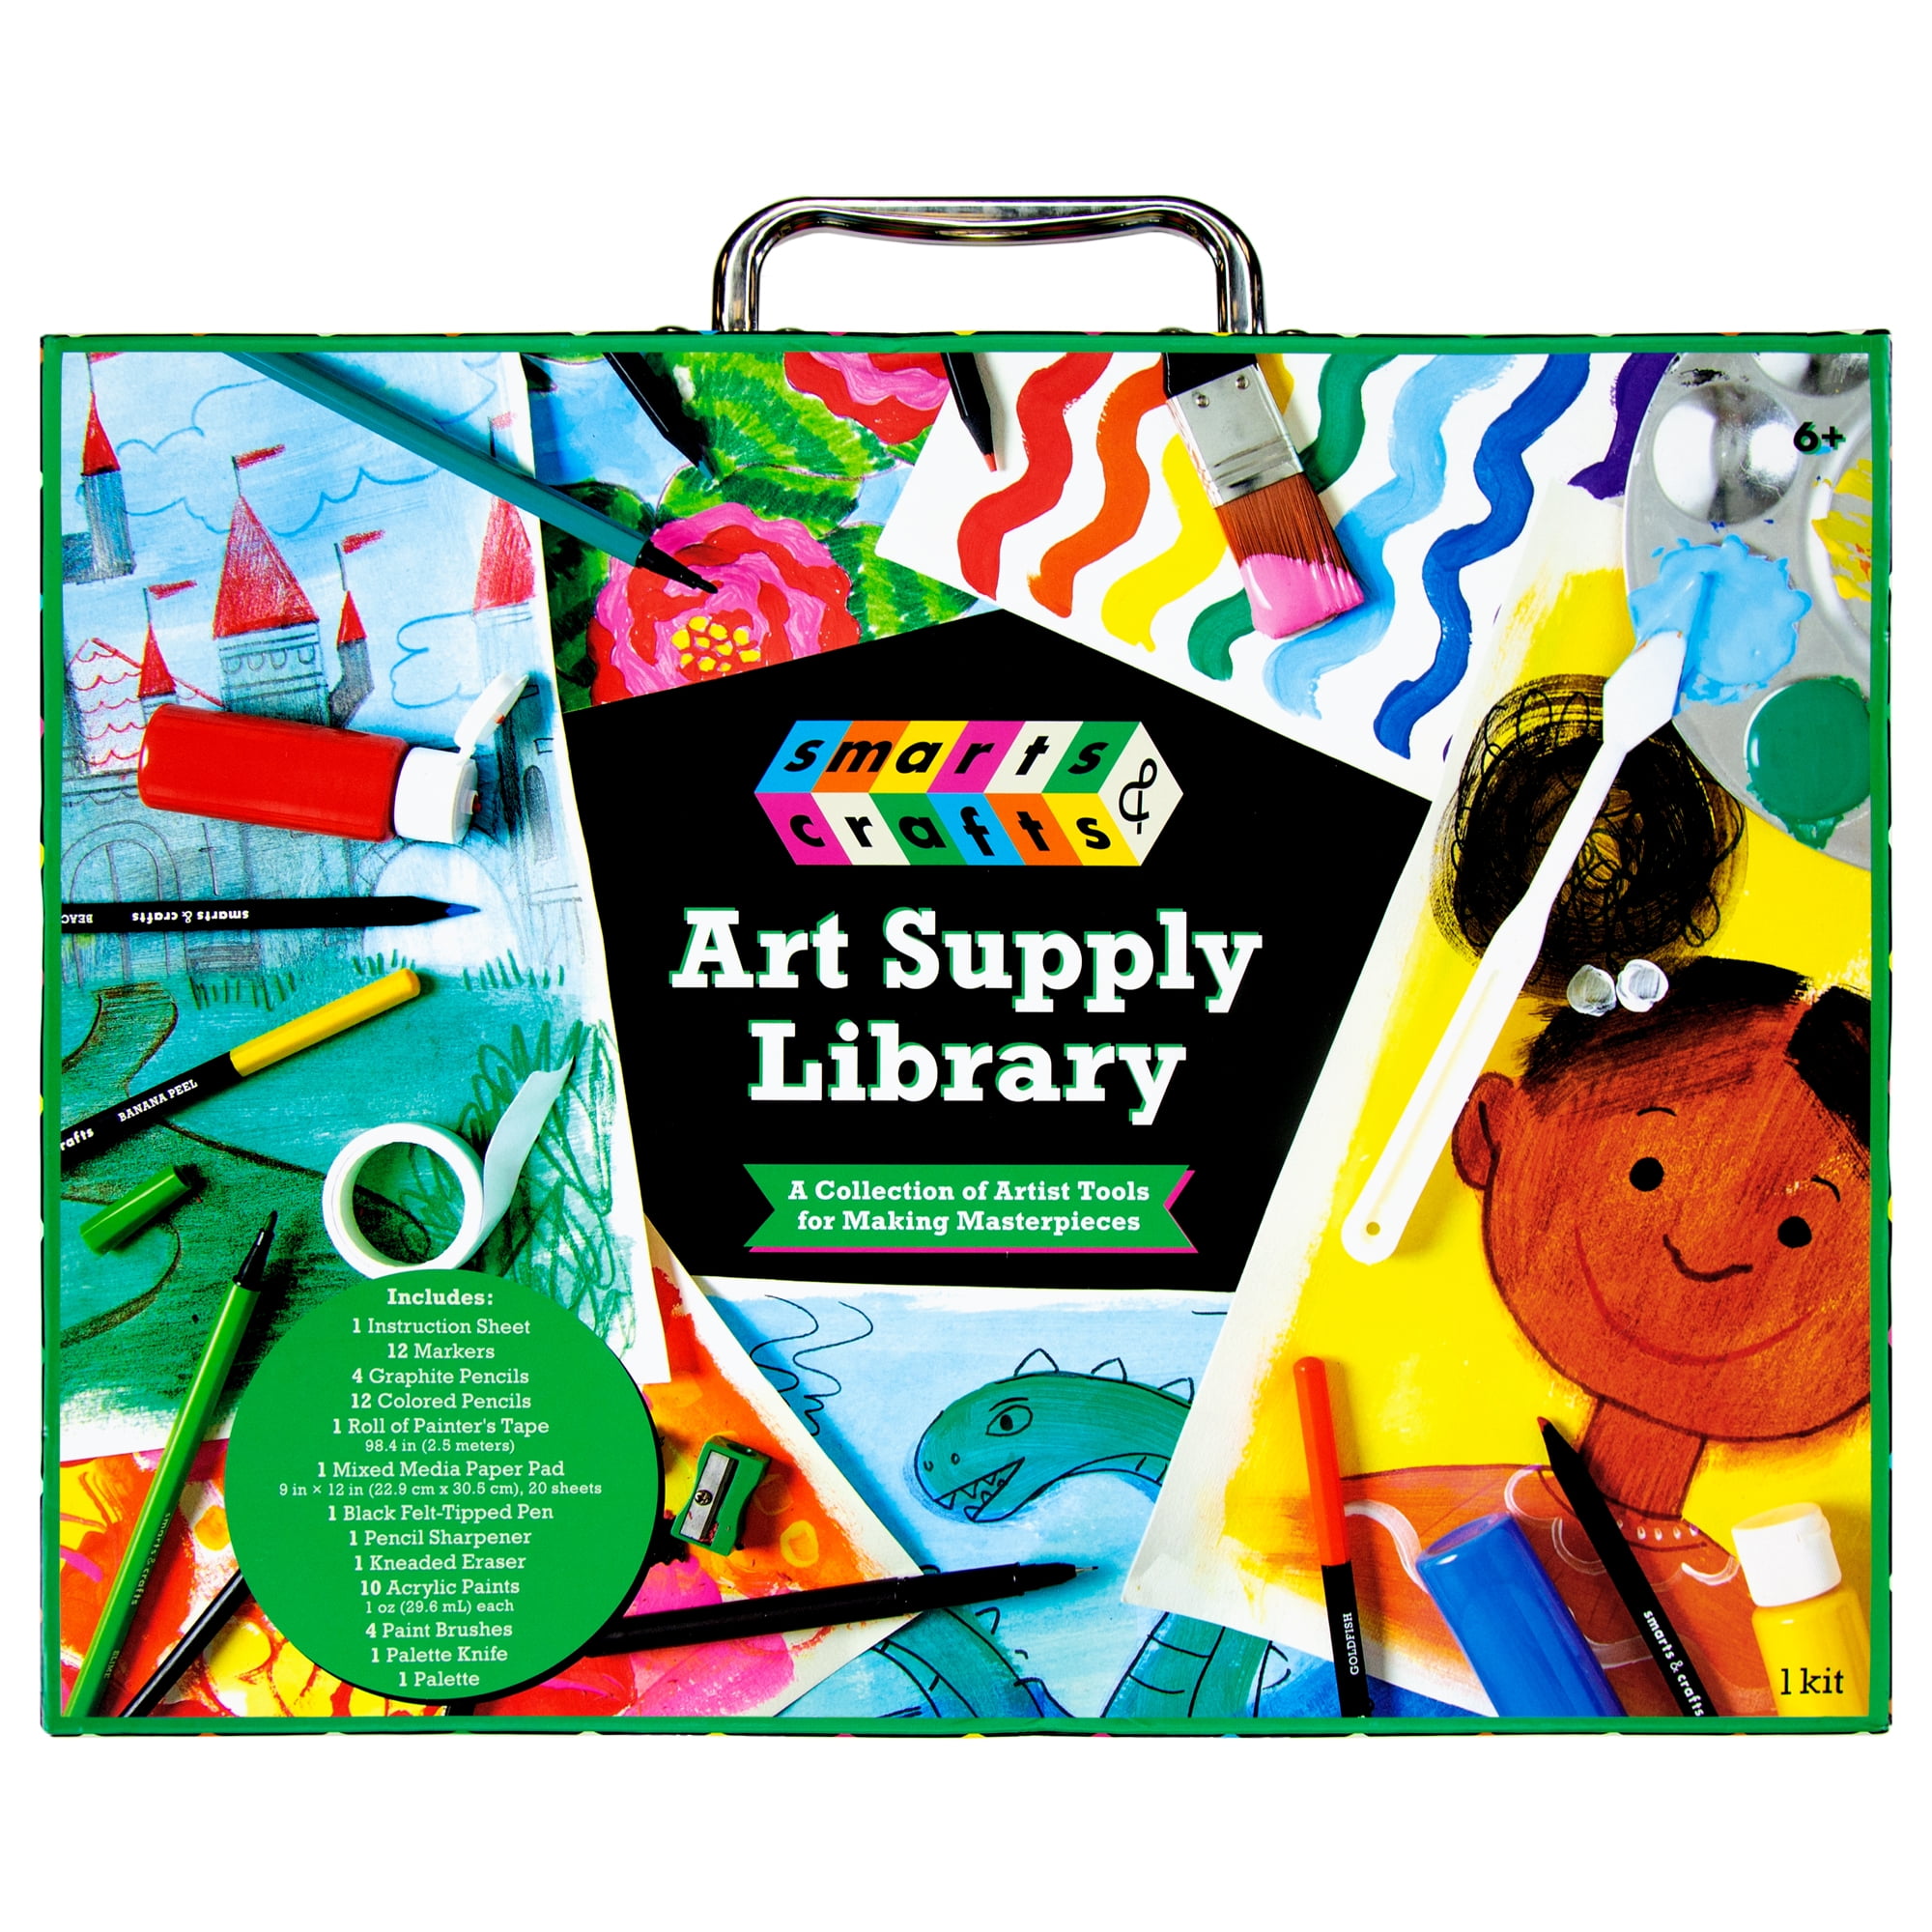 Ultimate List of Art Supplies for Your Creative Teen - Masterpiece